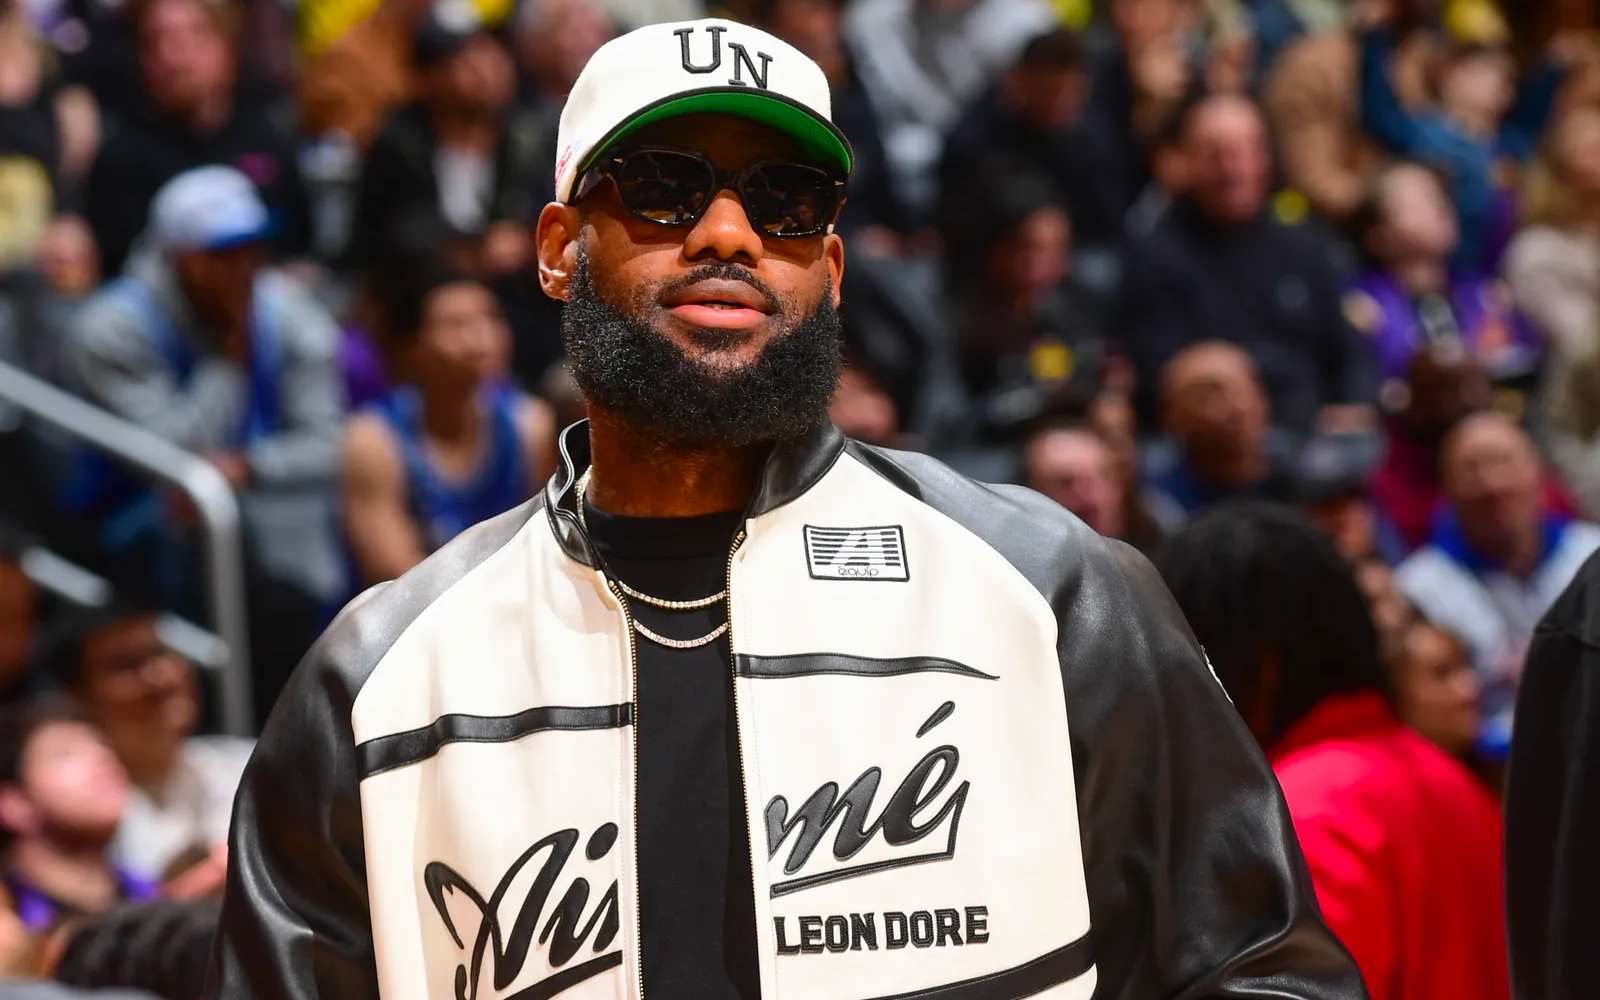 LeBron James' obsession with his trousers' hems